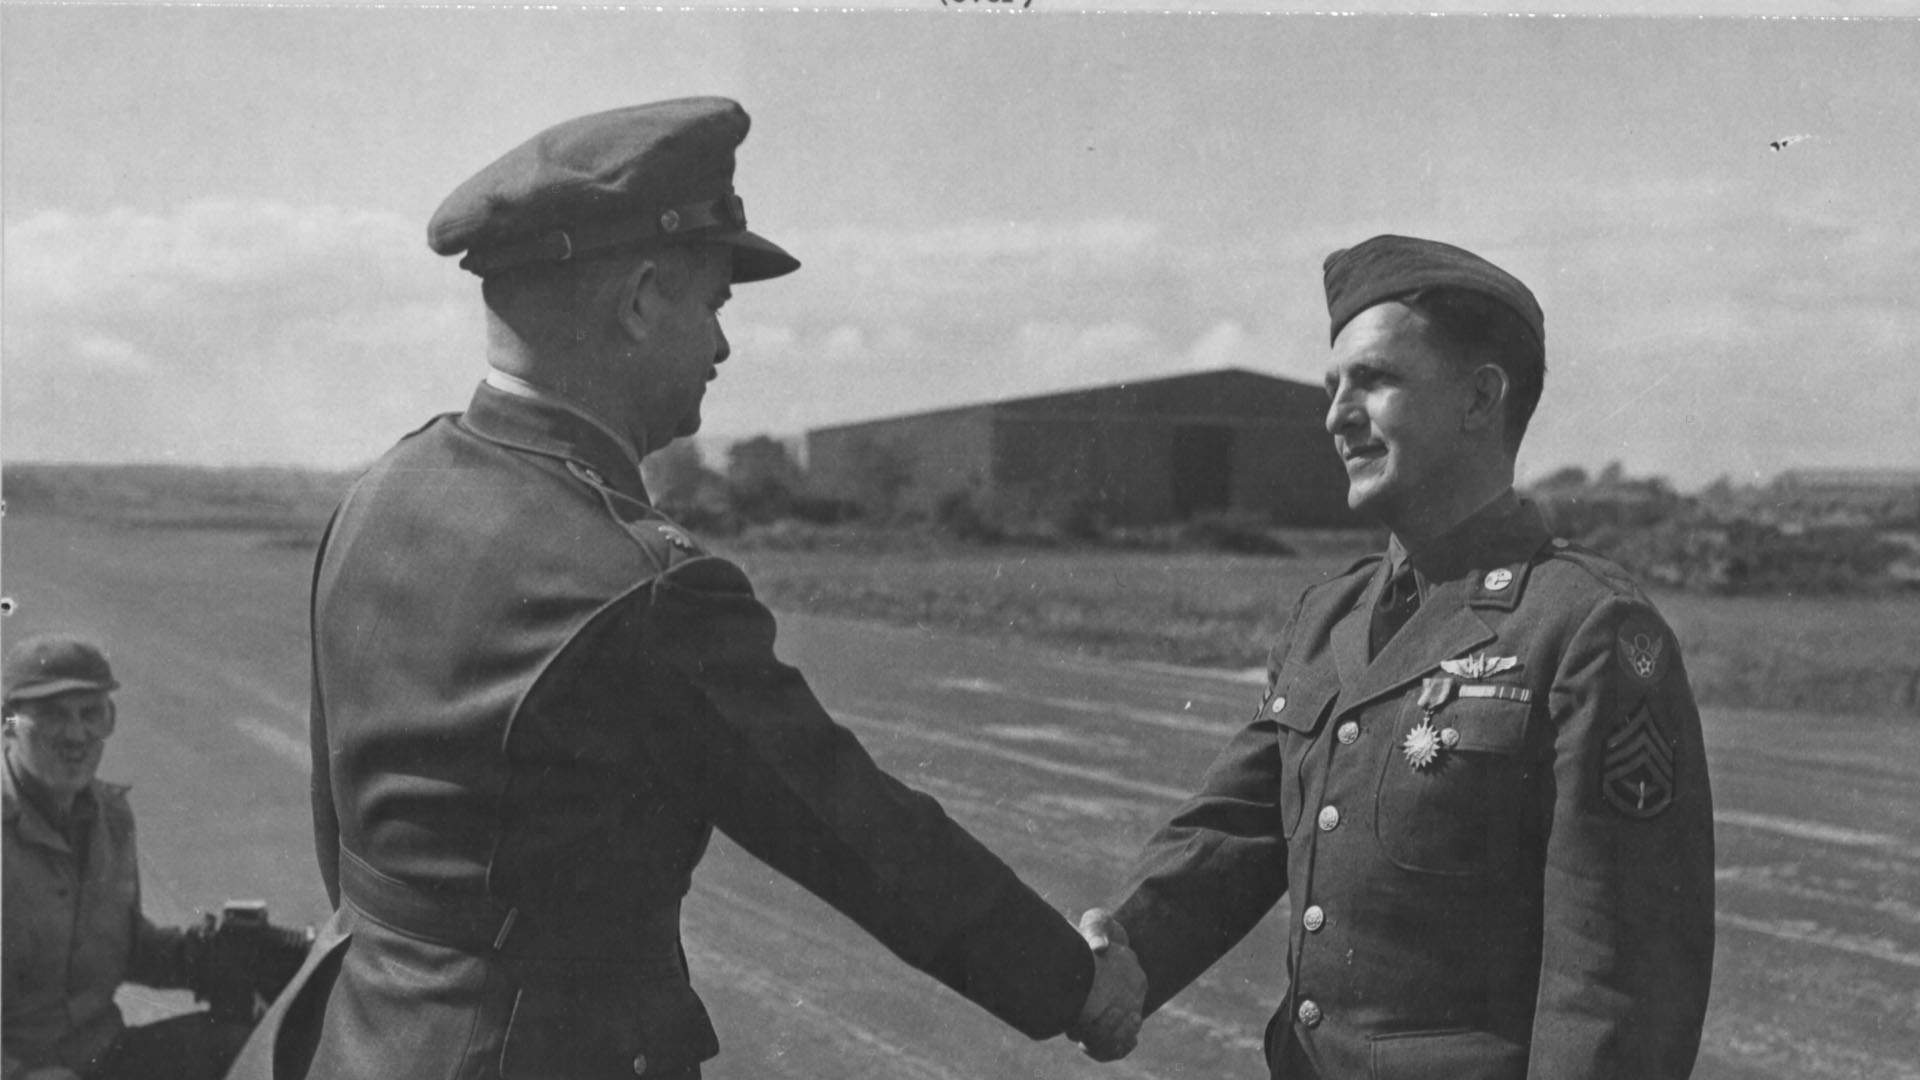 Lieutenant Colonel R.W. Crisp presents the Air Medal to Staff Sergeant George B. Boyte, a B-24 gunner from Lewiston, Idaho, U.S.A. during a ceremony at U.S.A.A.F. Station 236, Toome Airfield, Co. Antrim on 2nd September 1943.